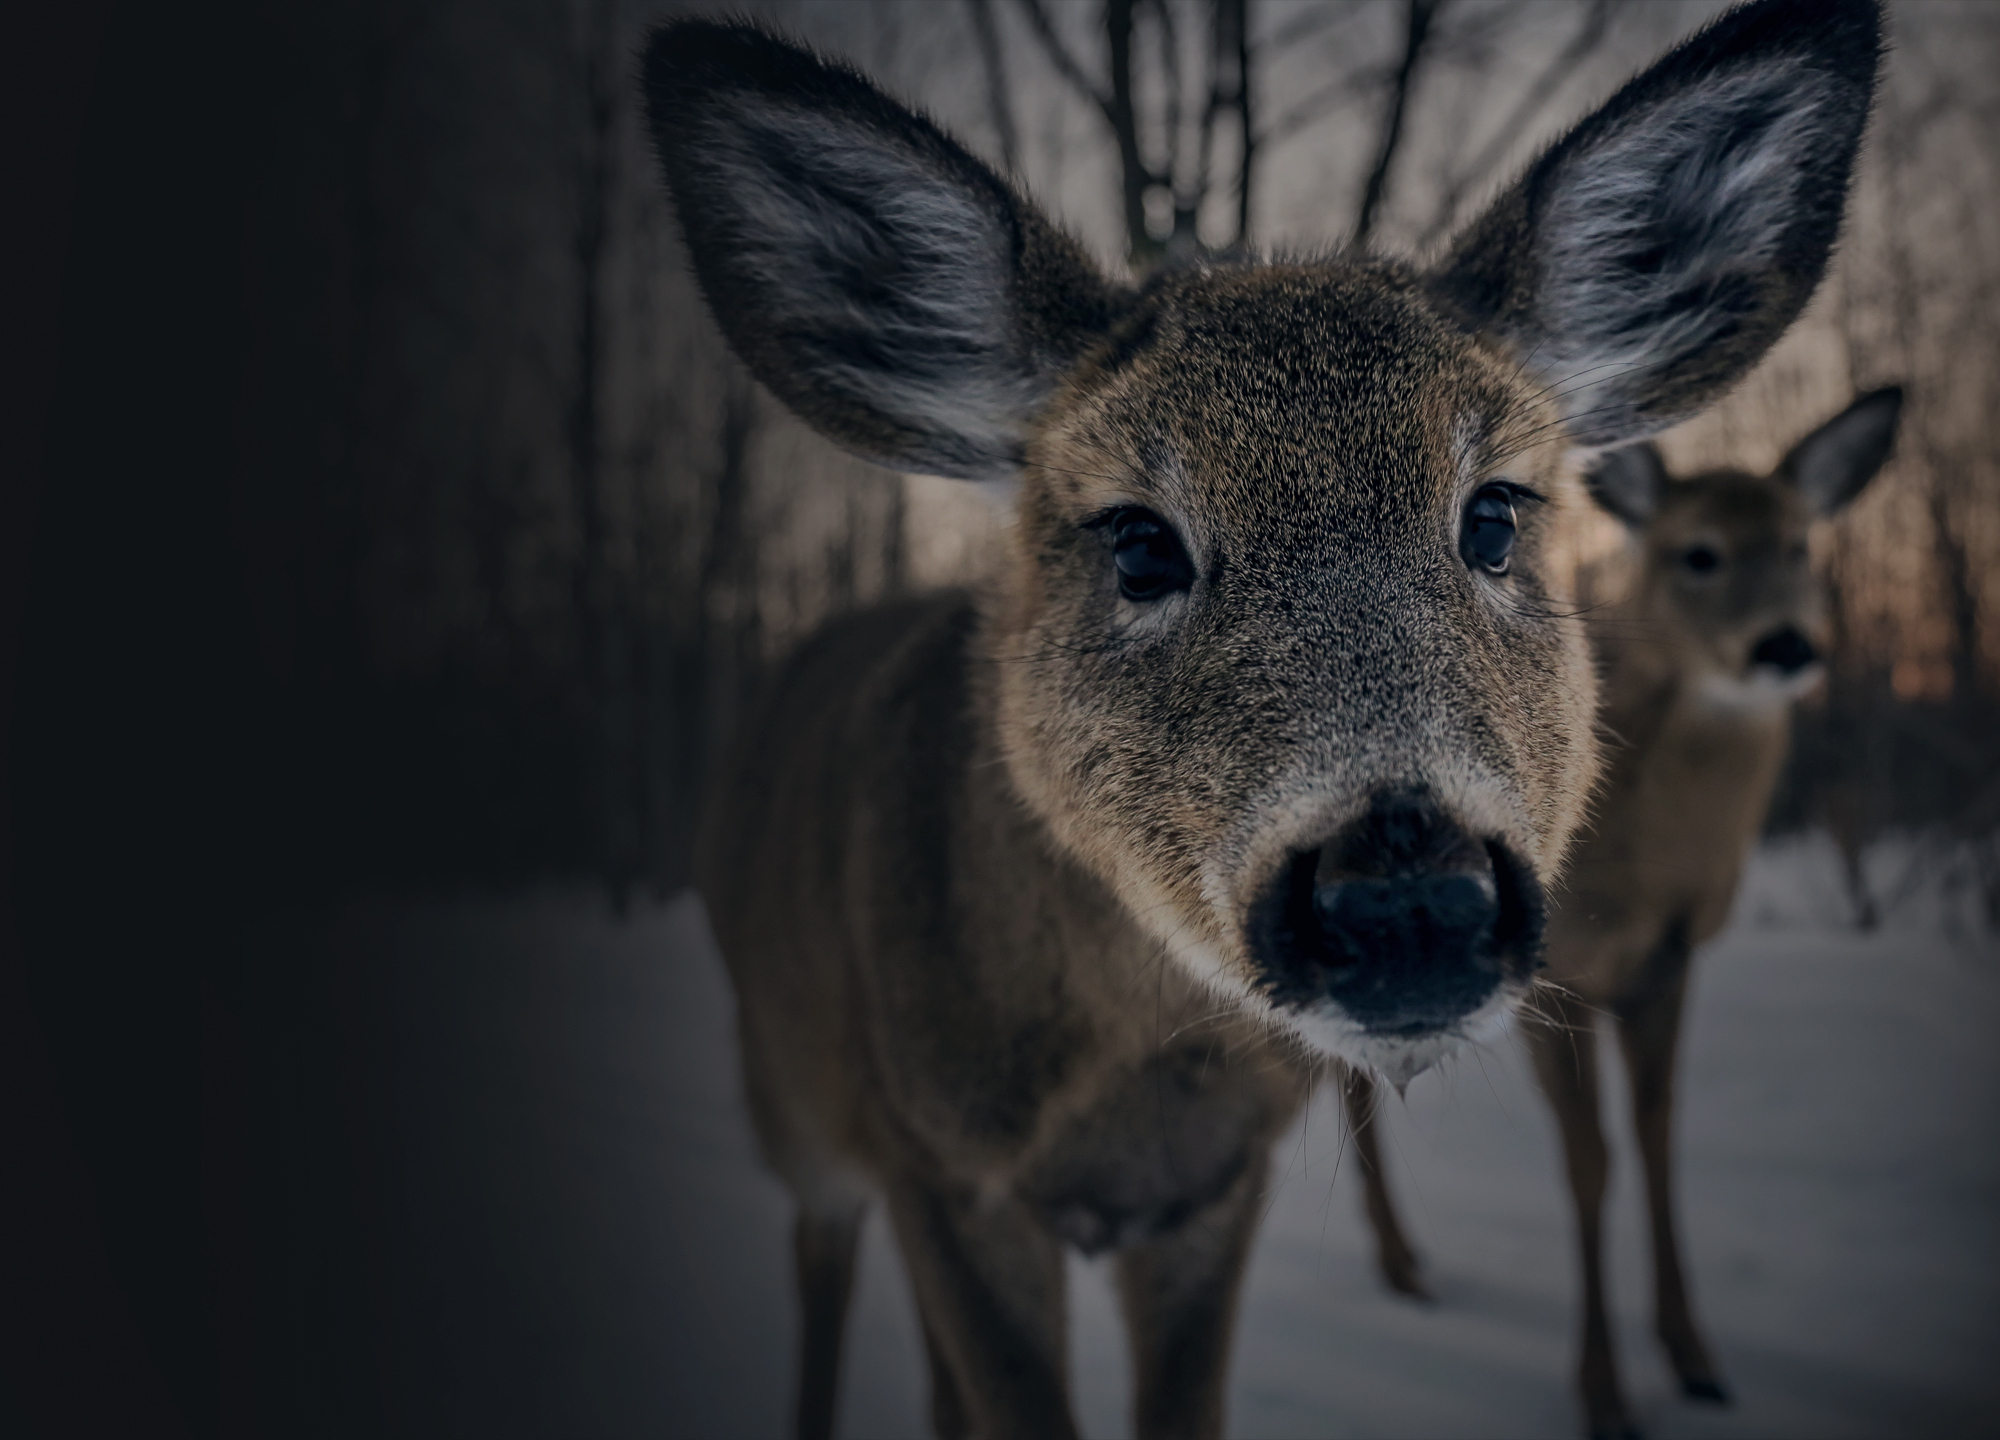 A deer with its muzzle very close to the camera